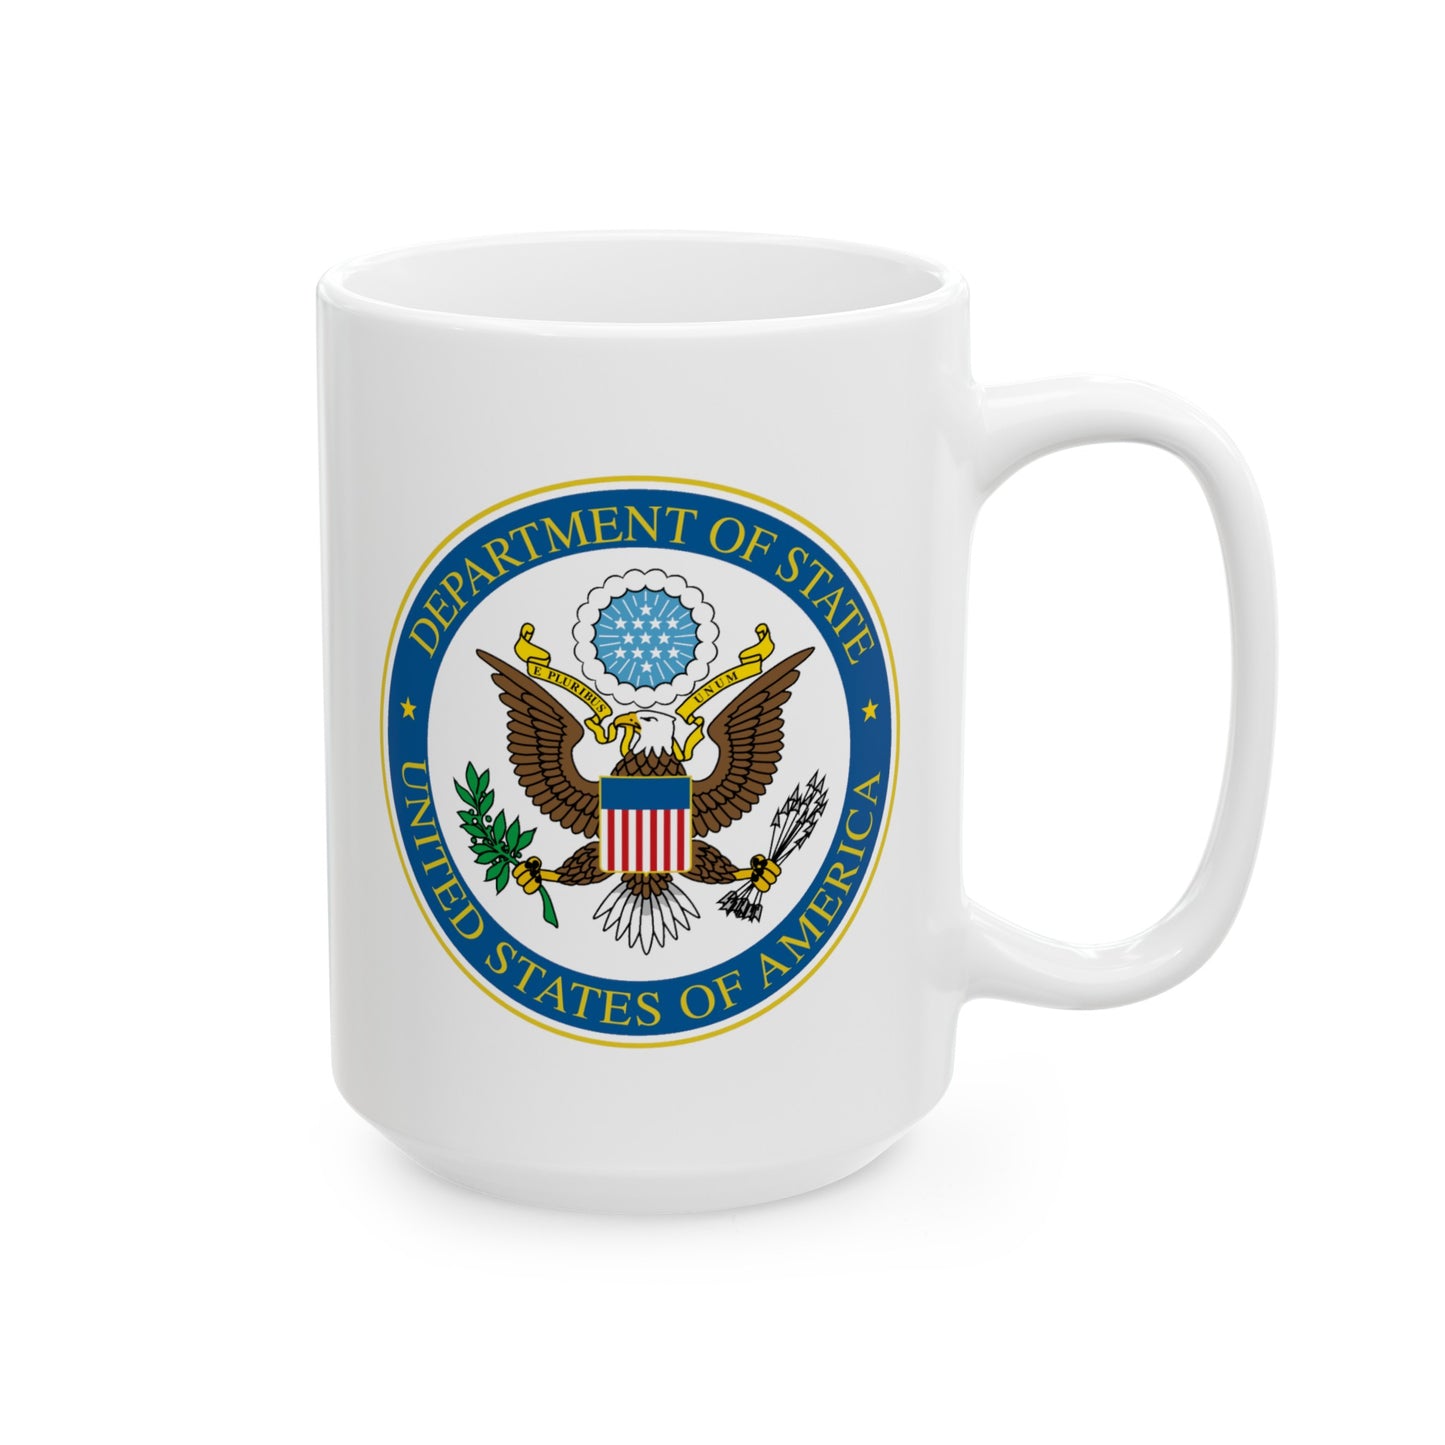 Department of State Coffee Mug - Double Sided White Ceramic 15oz by TheGlassyLass.com